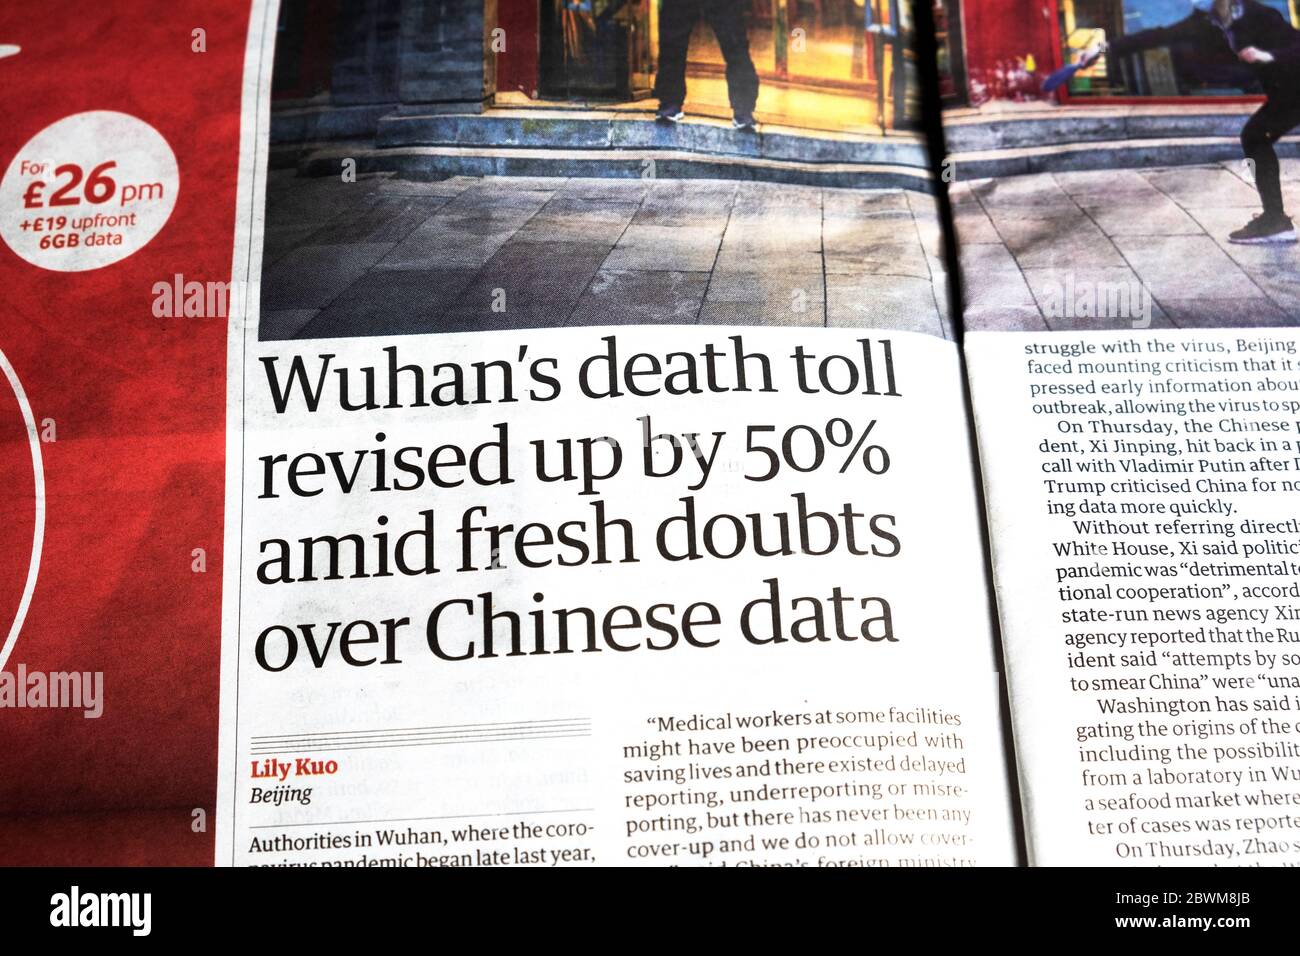 'Wuhan's death toll revised up by 50% amid fresh doubts over Chinese data' article in Guardian newspaper headline18 April 2020 Stock Photo